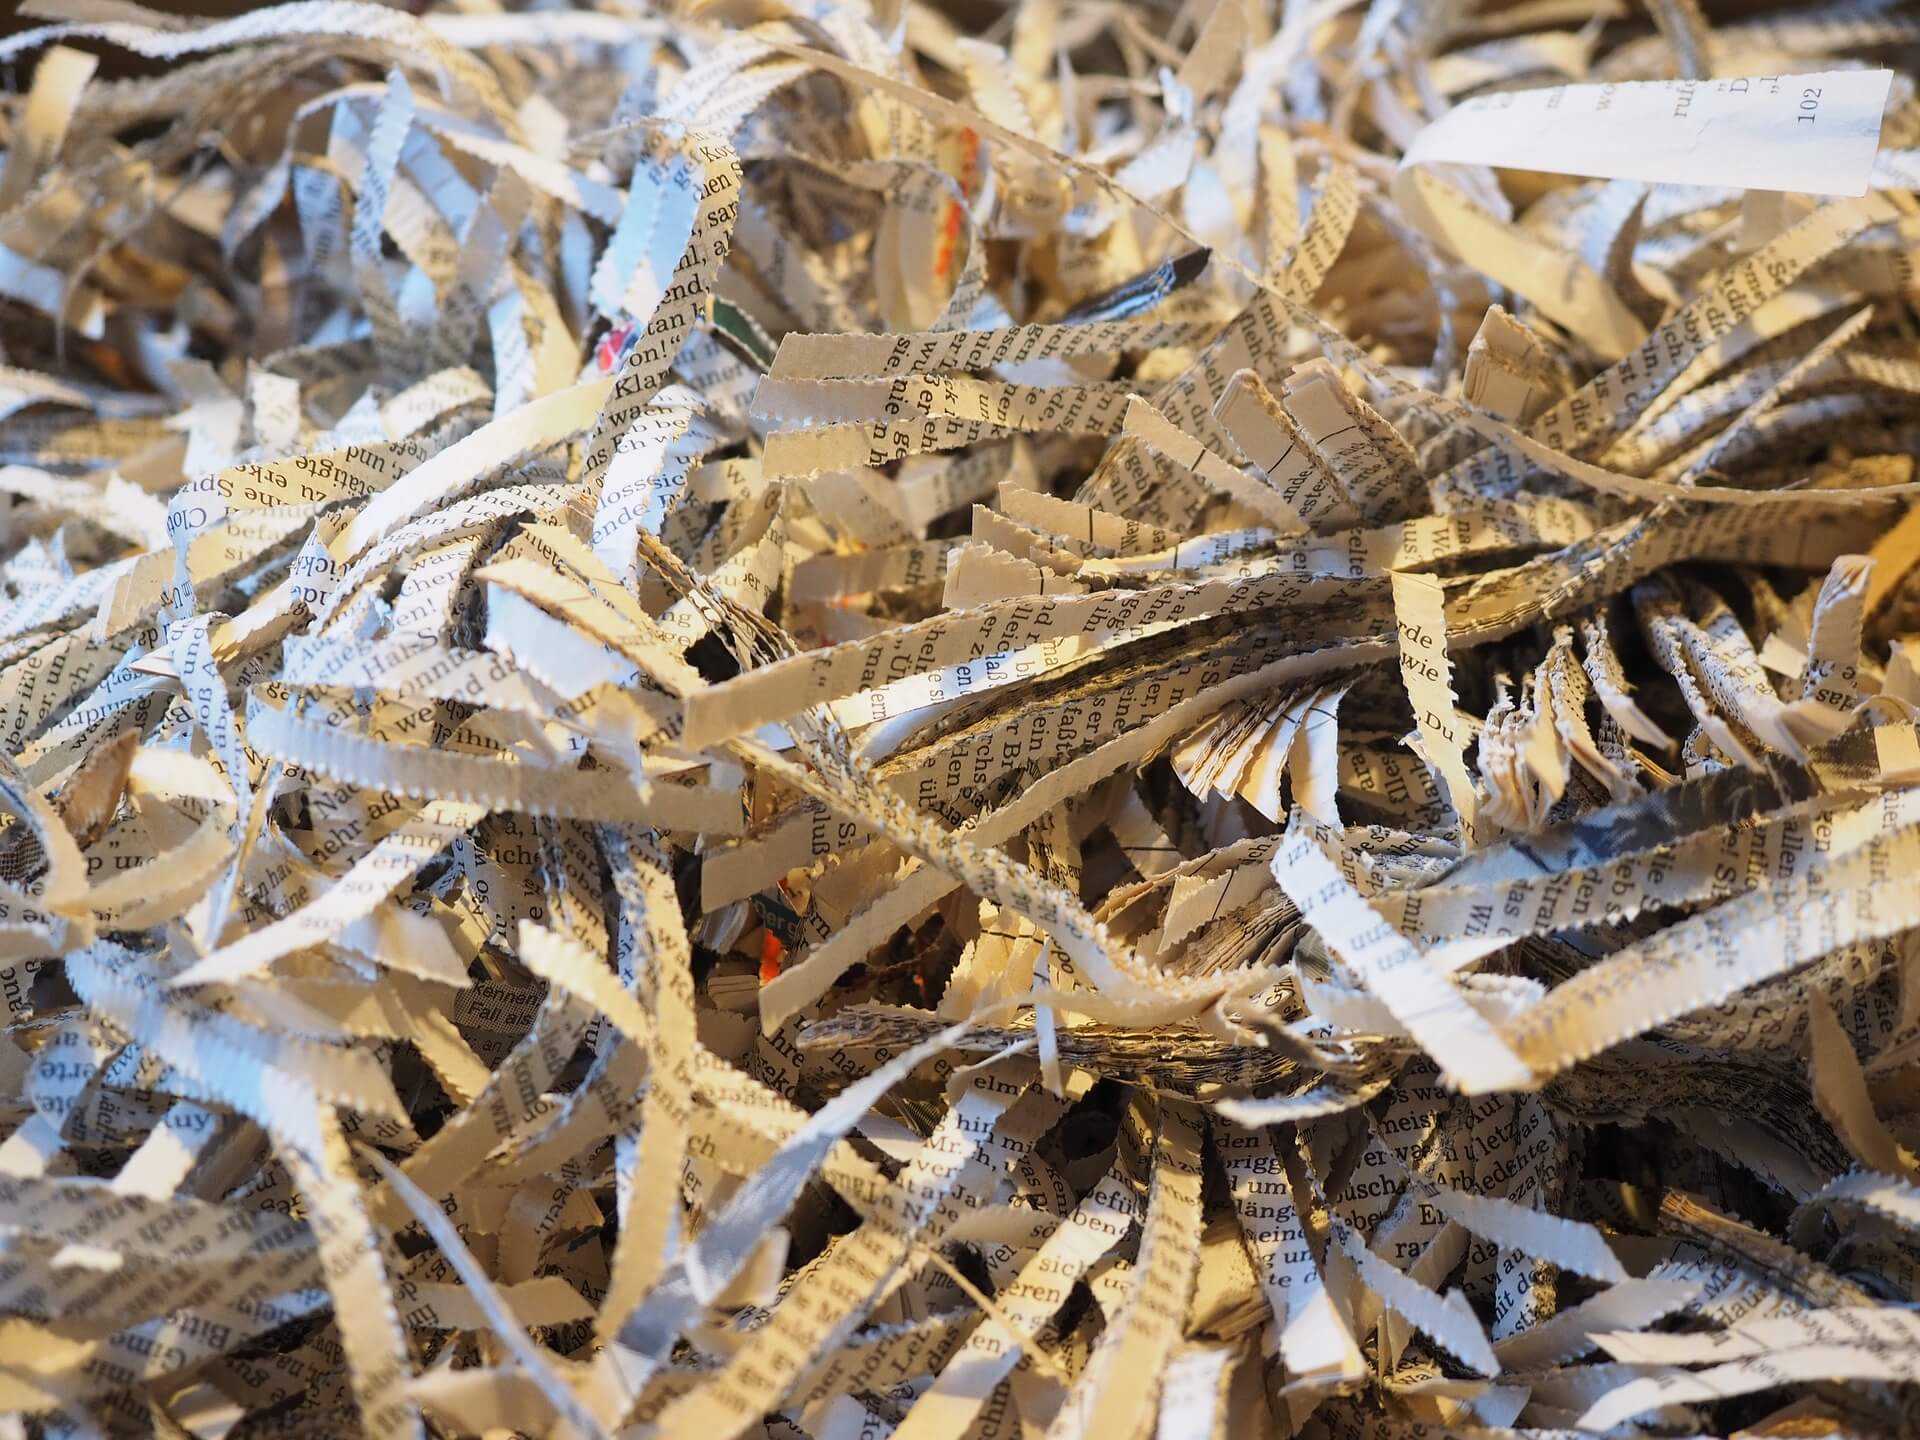 Keeping private information private. Knowing when and what to shred.